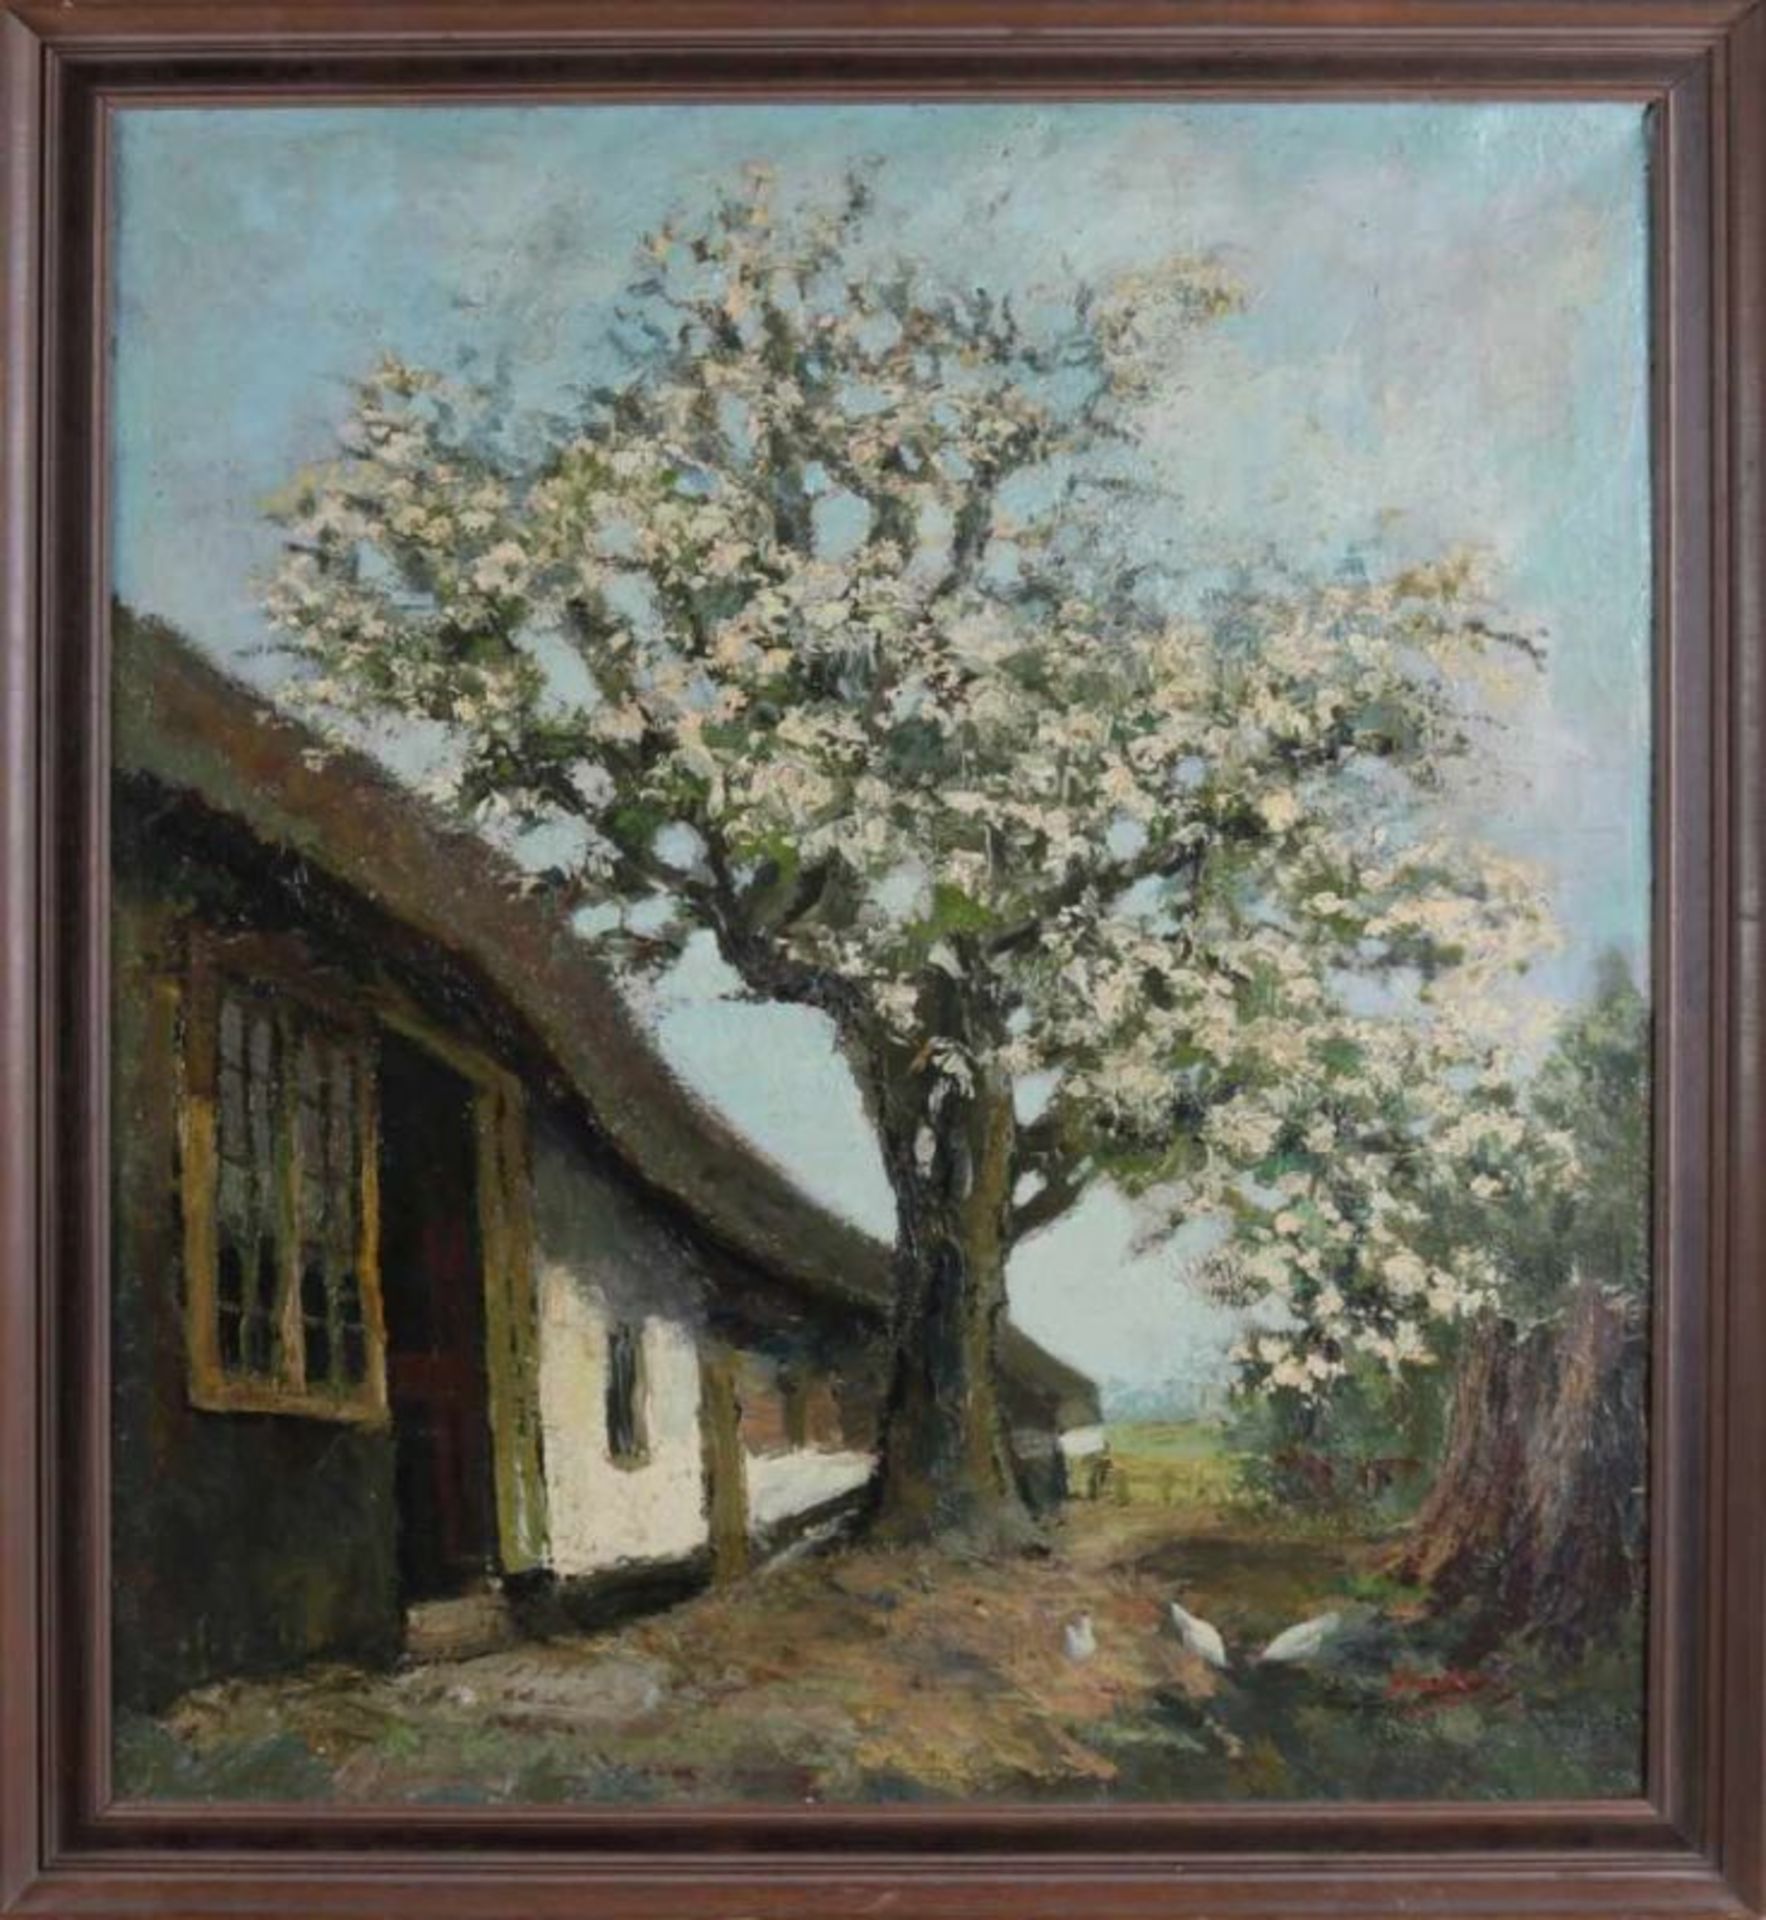 H. Fortuin. Farmhouse at fruit tree, circa 1920.  Oil paint on linen. Dimensions: 66 x 60 cm. In